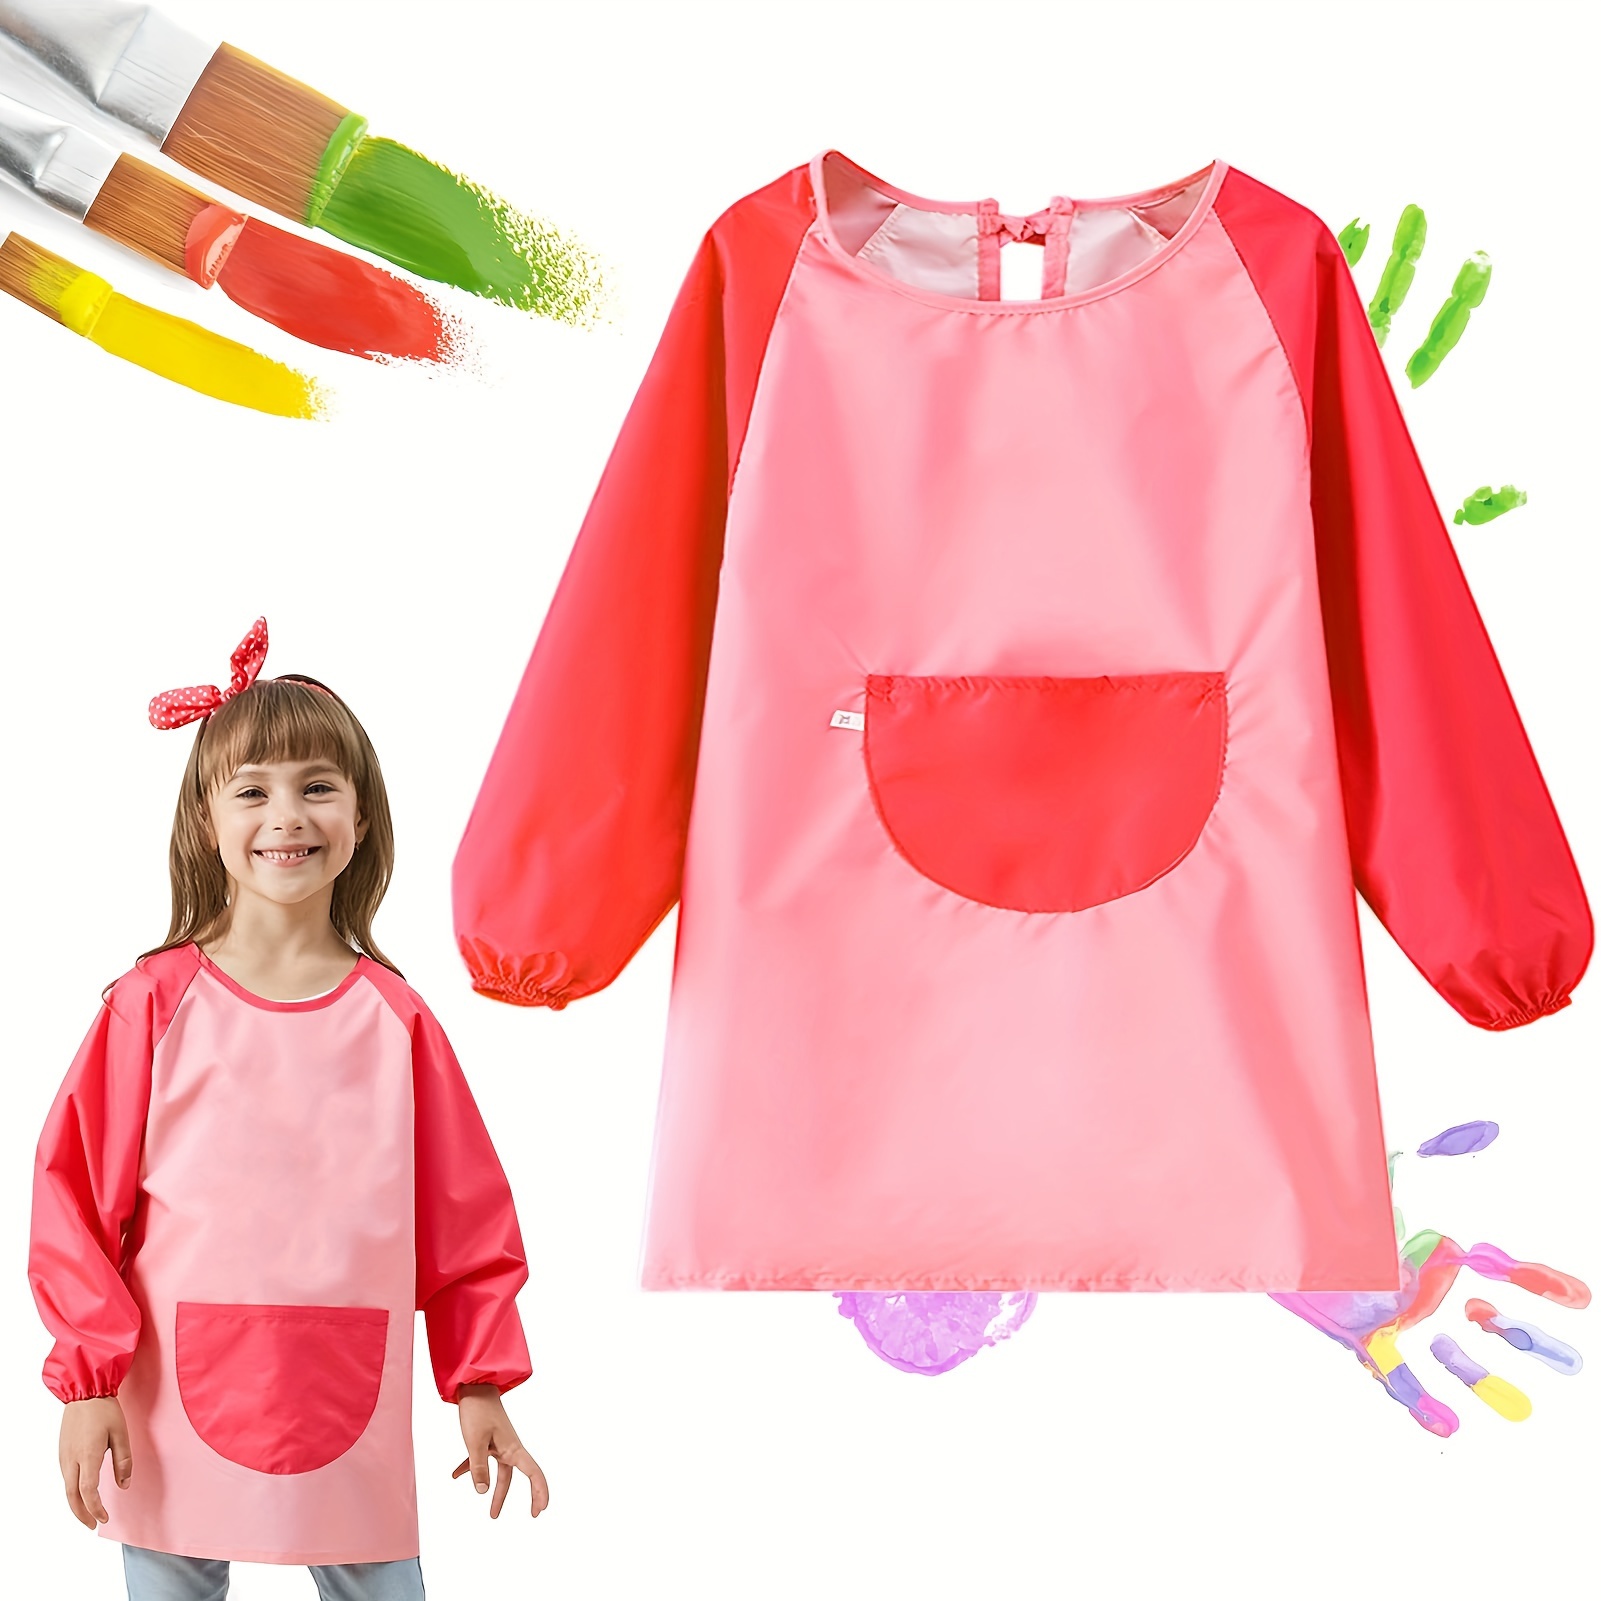 Kids Art Smocks Painting Apron for Children Waterproof Artist Smock with Long Sleeve and 3 Pockets for Age 3-8 Years, Kids Unisex, Size: One size, Red